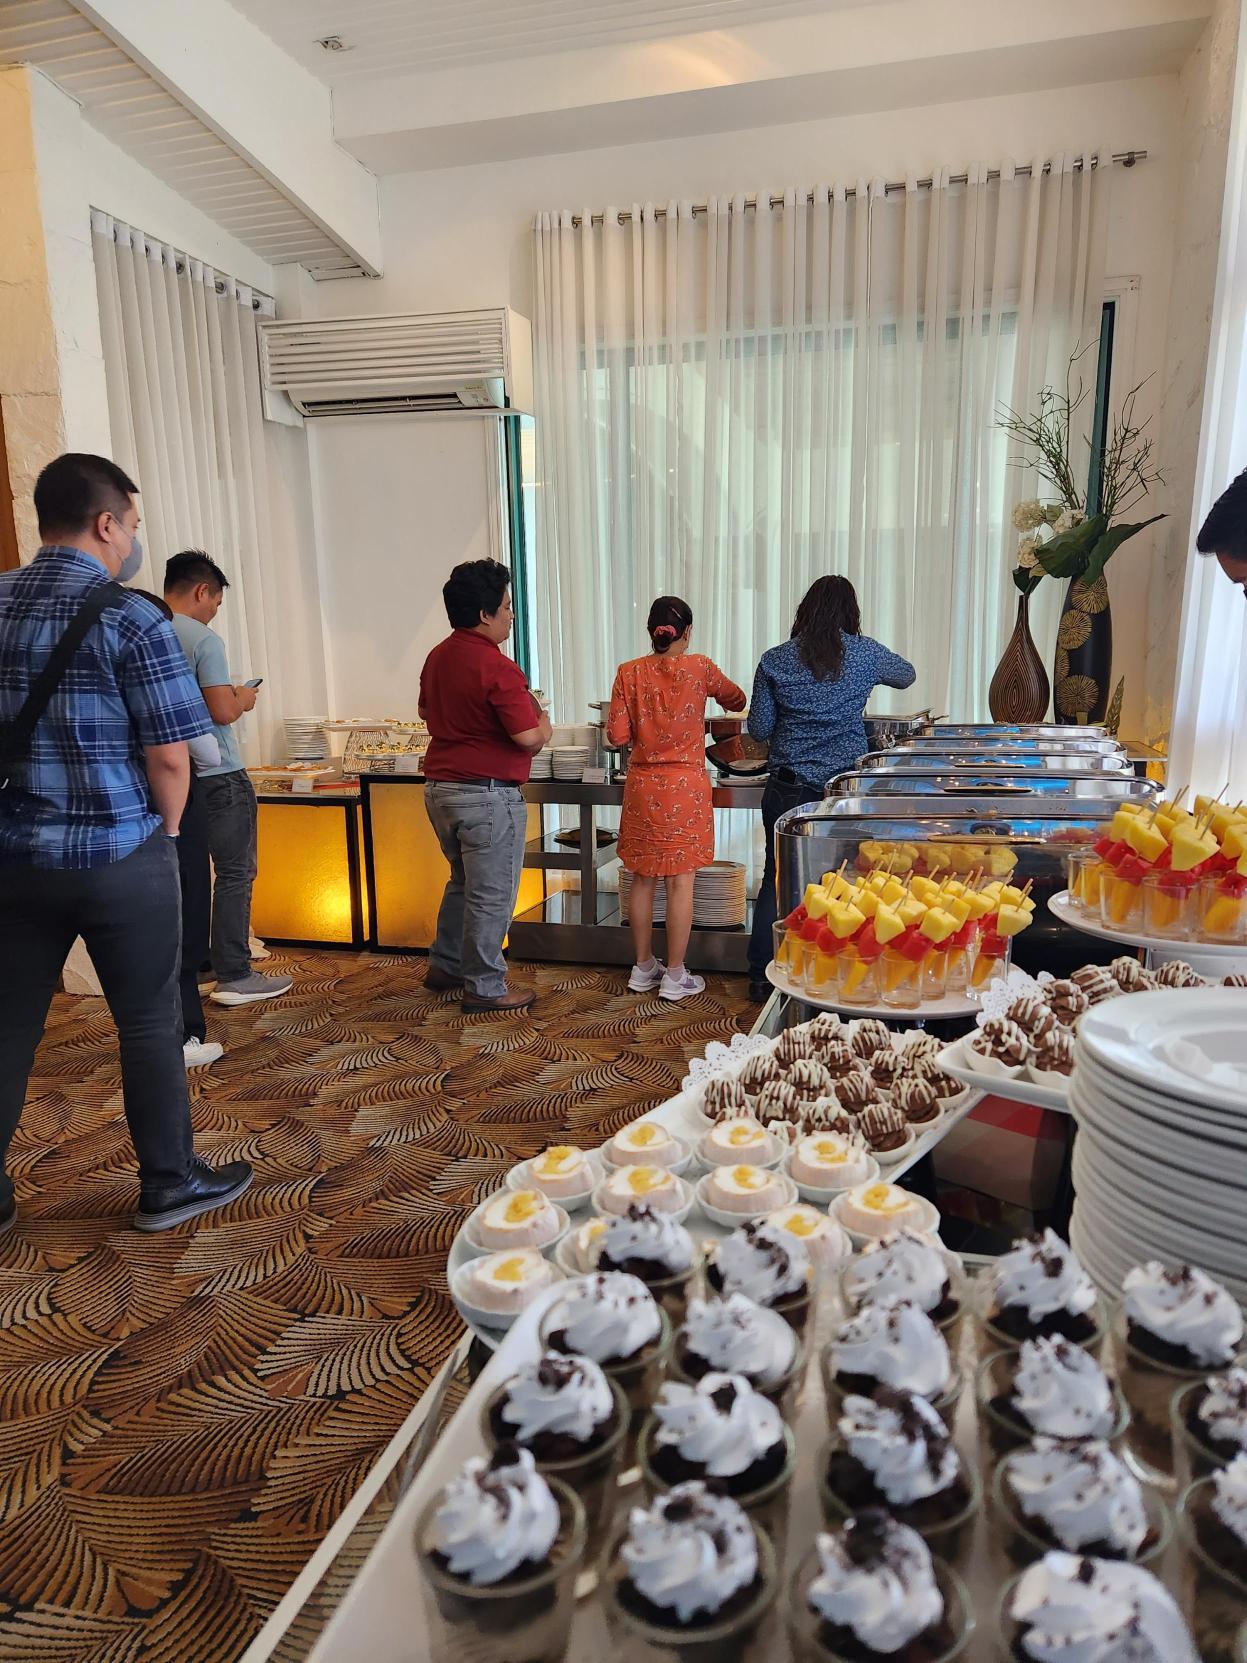 Attendees lining up for snacks and refreshments during the event